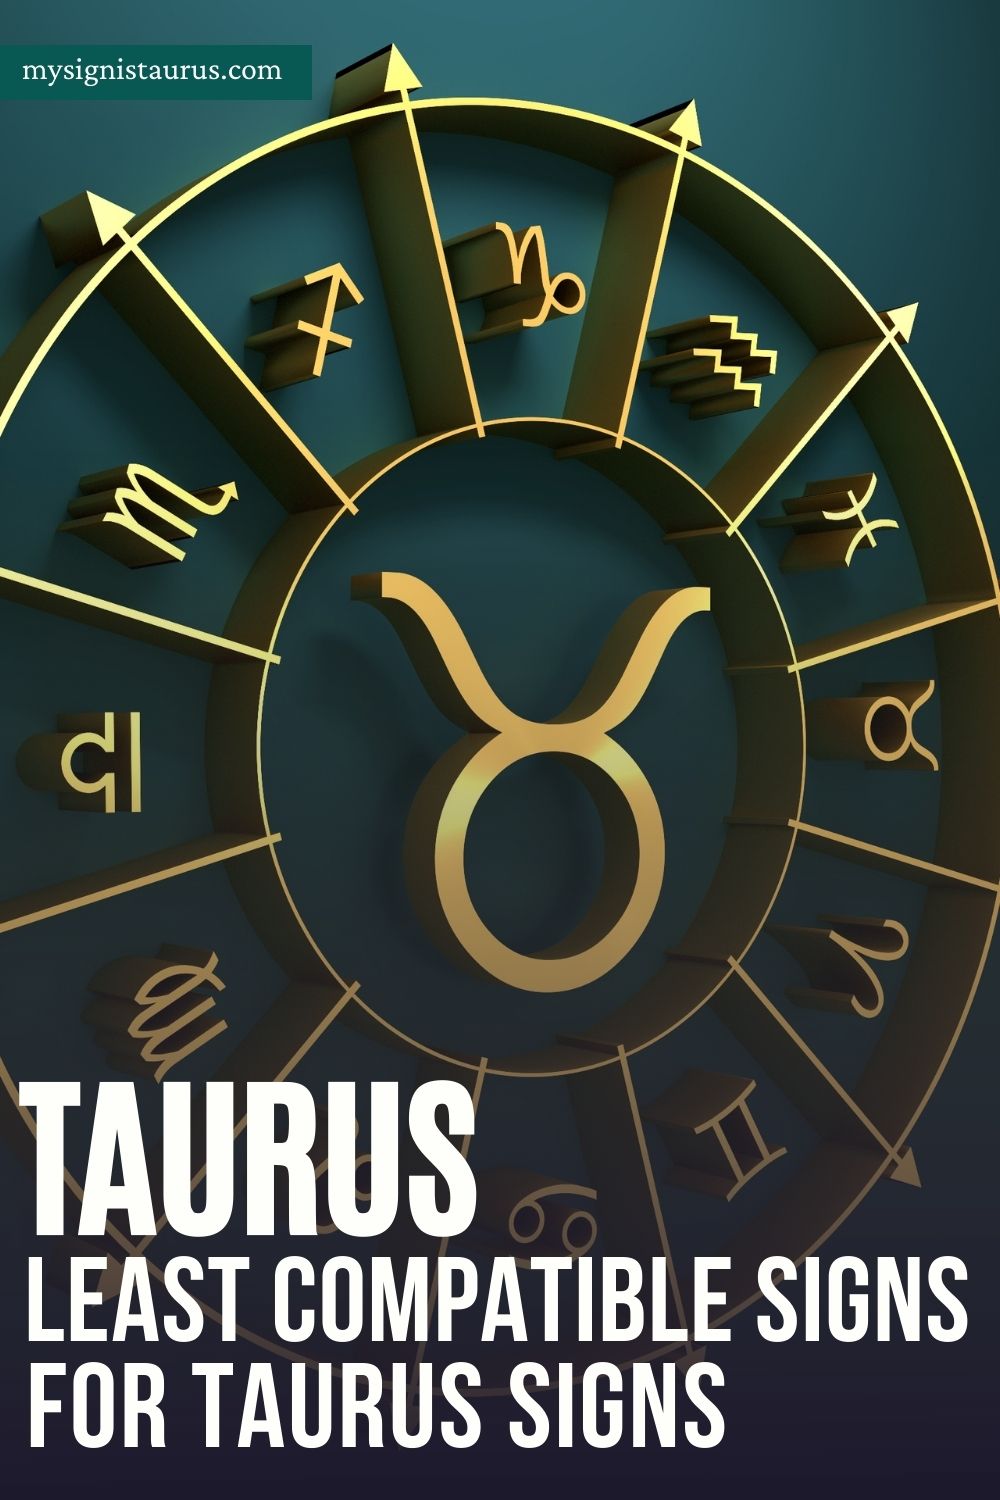 3 Zodiac Signs That Are Least Compatible With Taurus sign